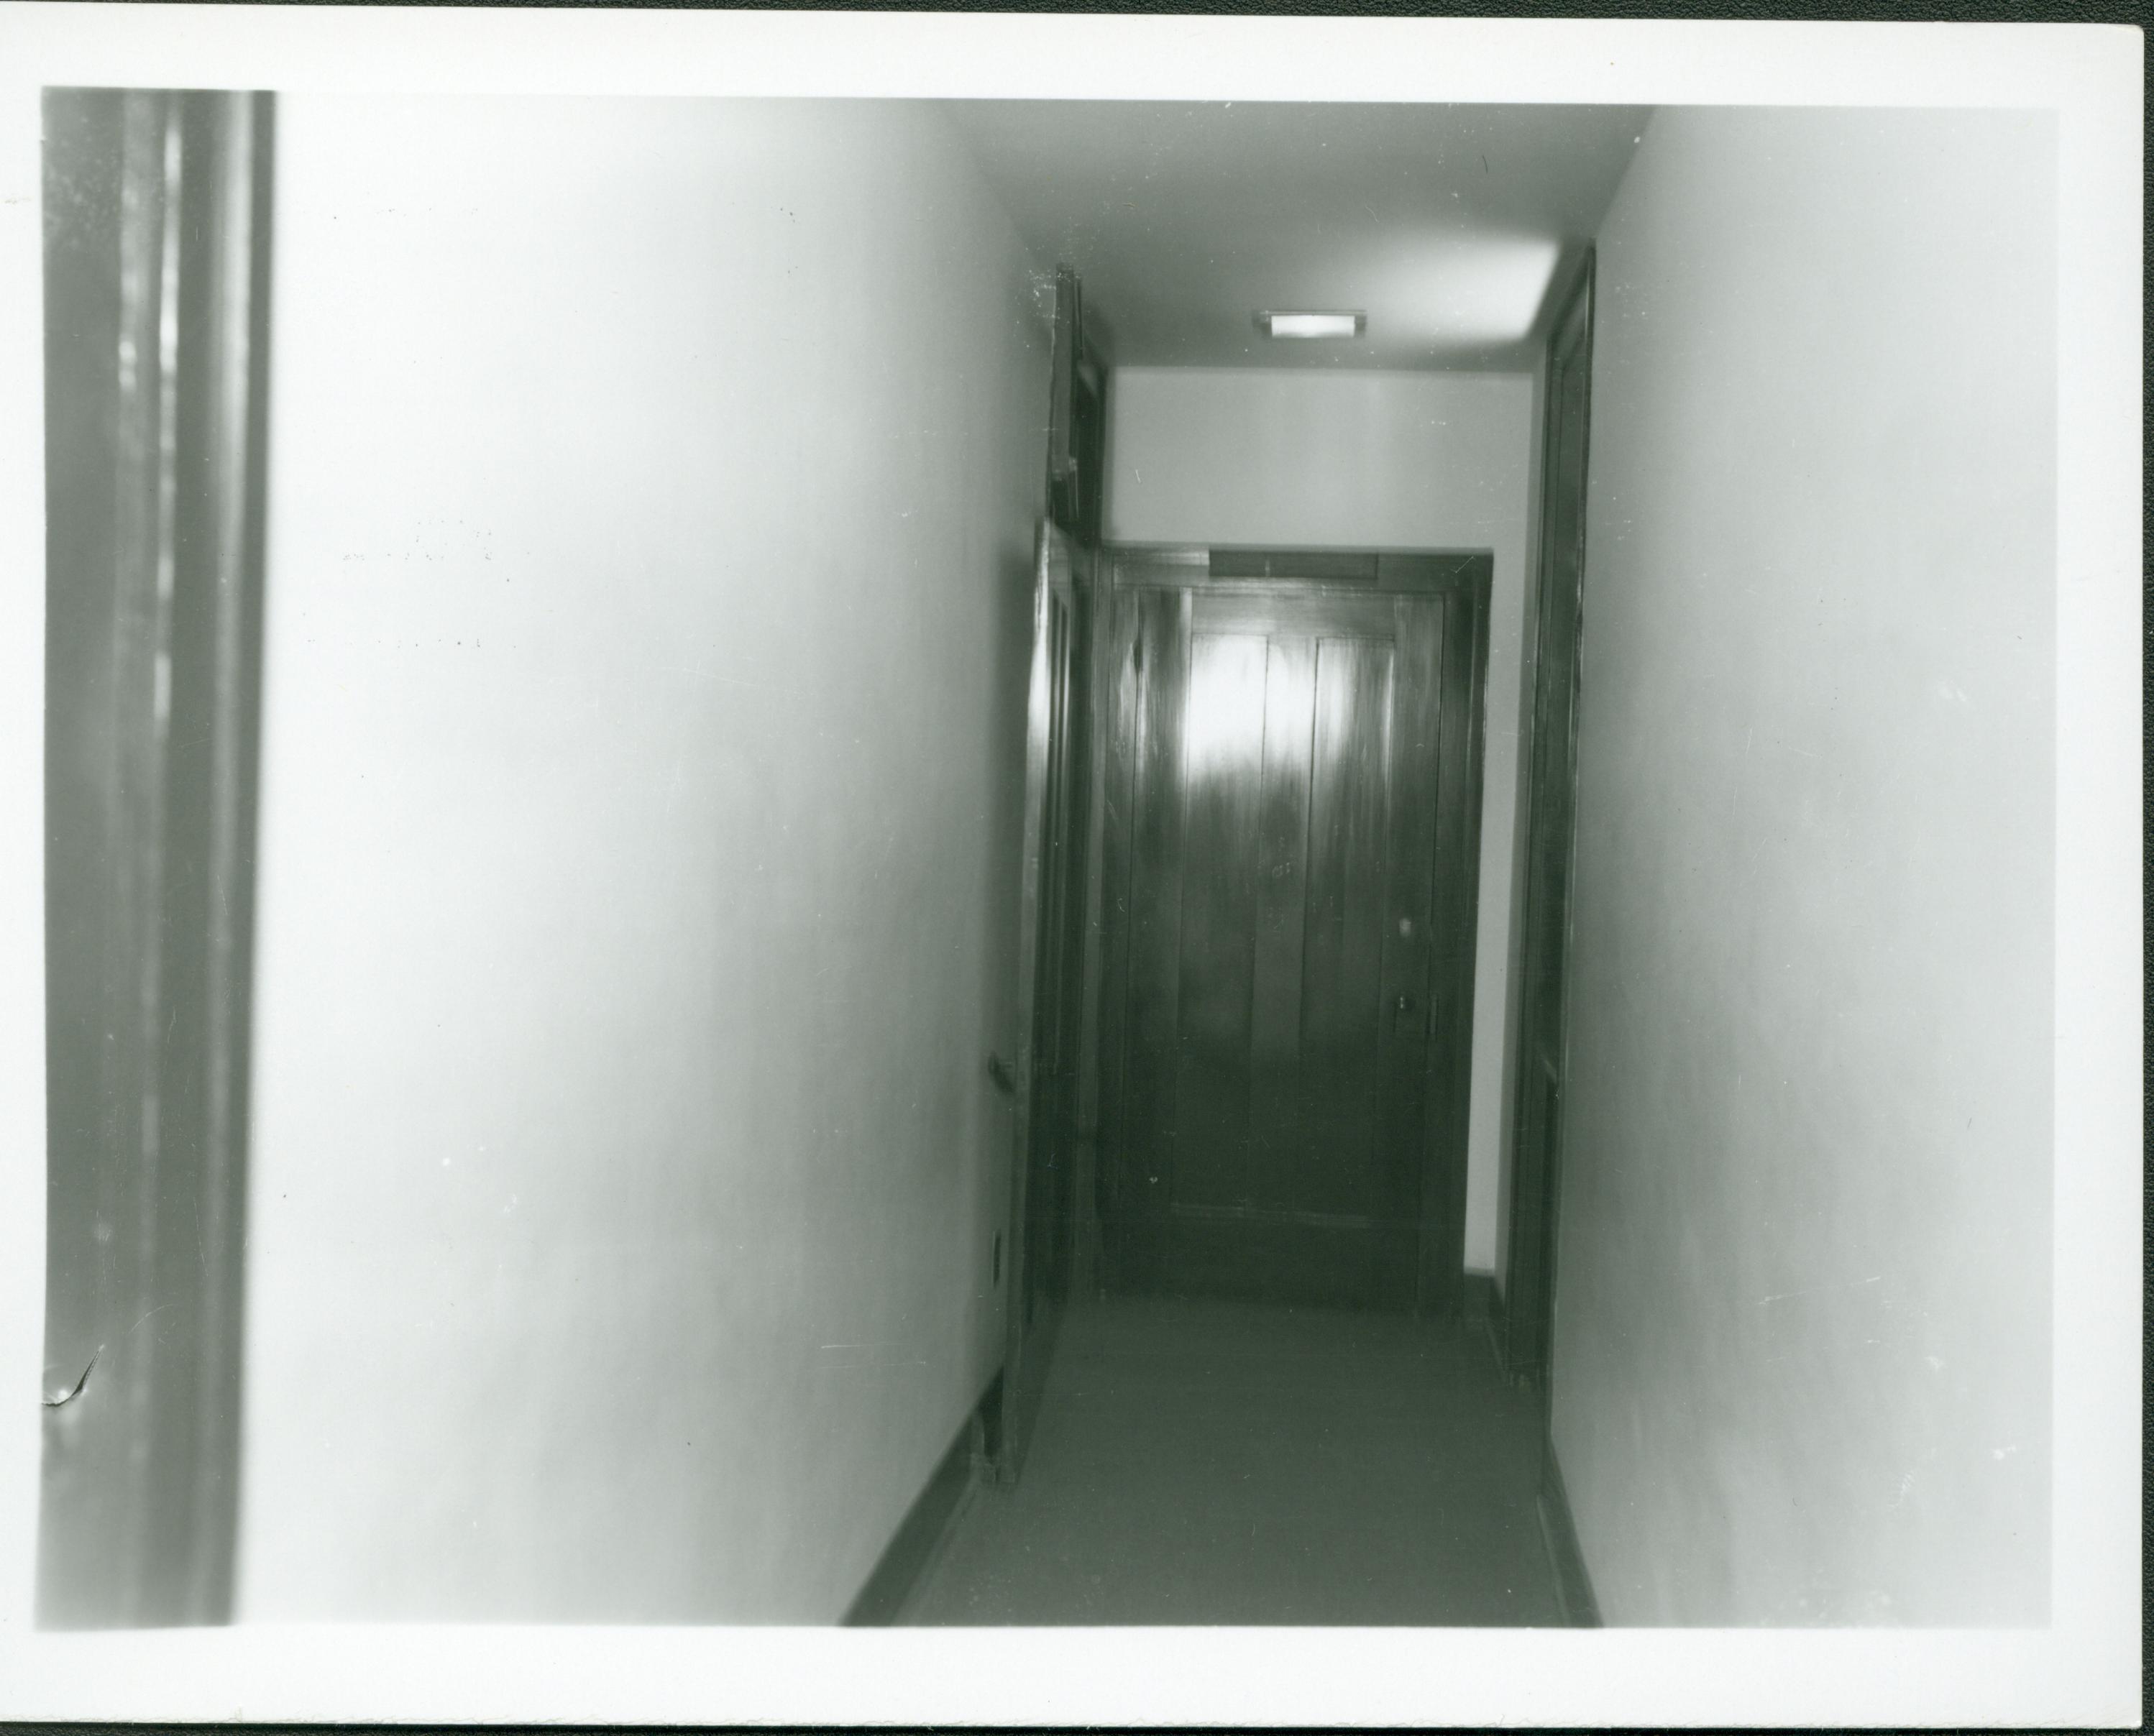 Second floor back hall prior to restoration, circa 1974. Photographer facing west. Note the now-demolished and relocated doorway and transom to Boy's room on left side of hall in background.